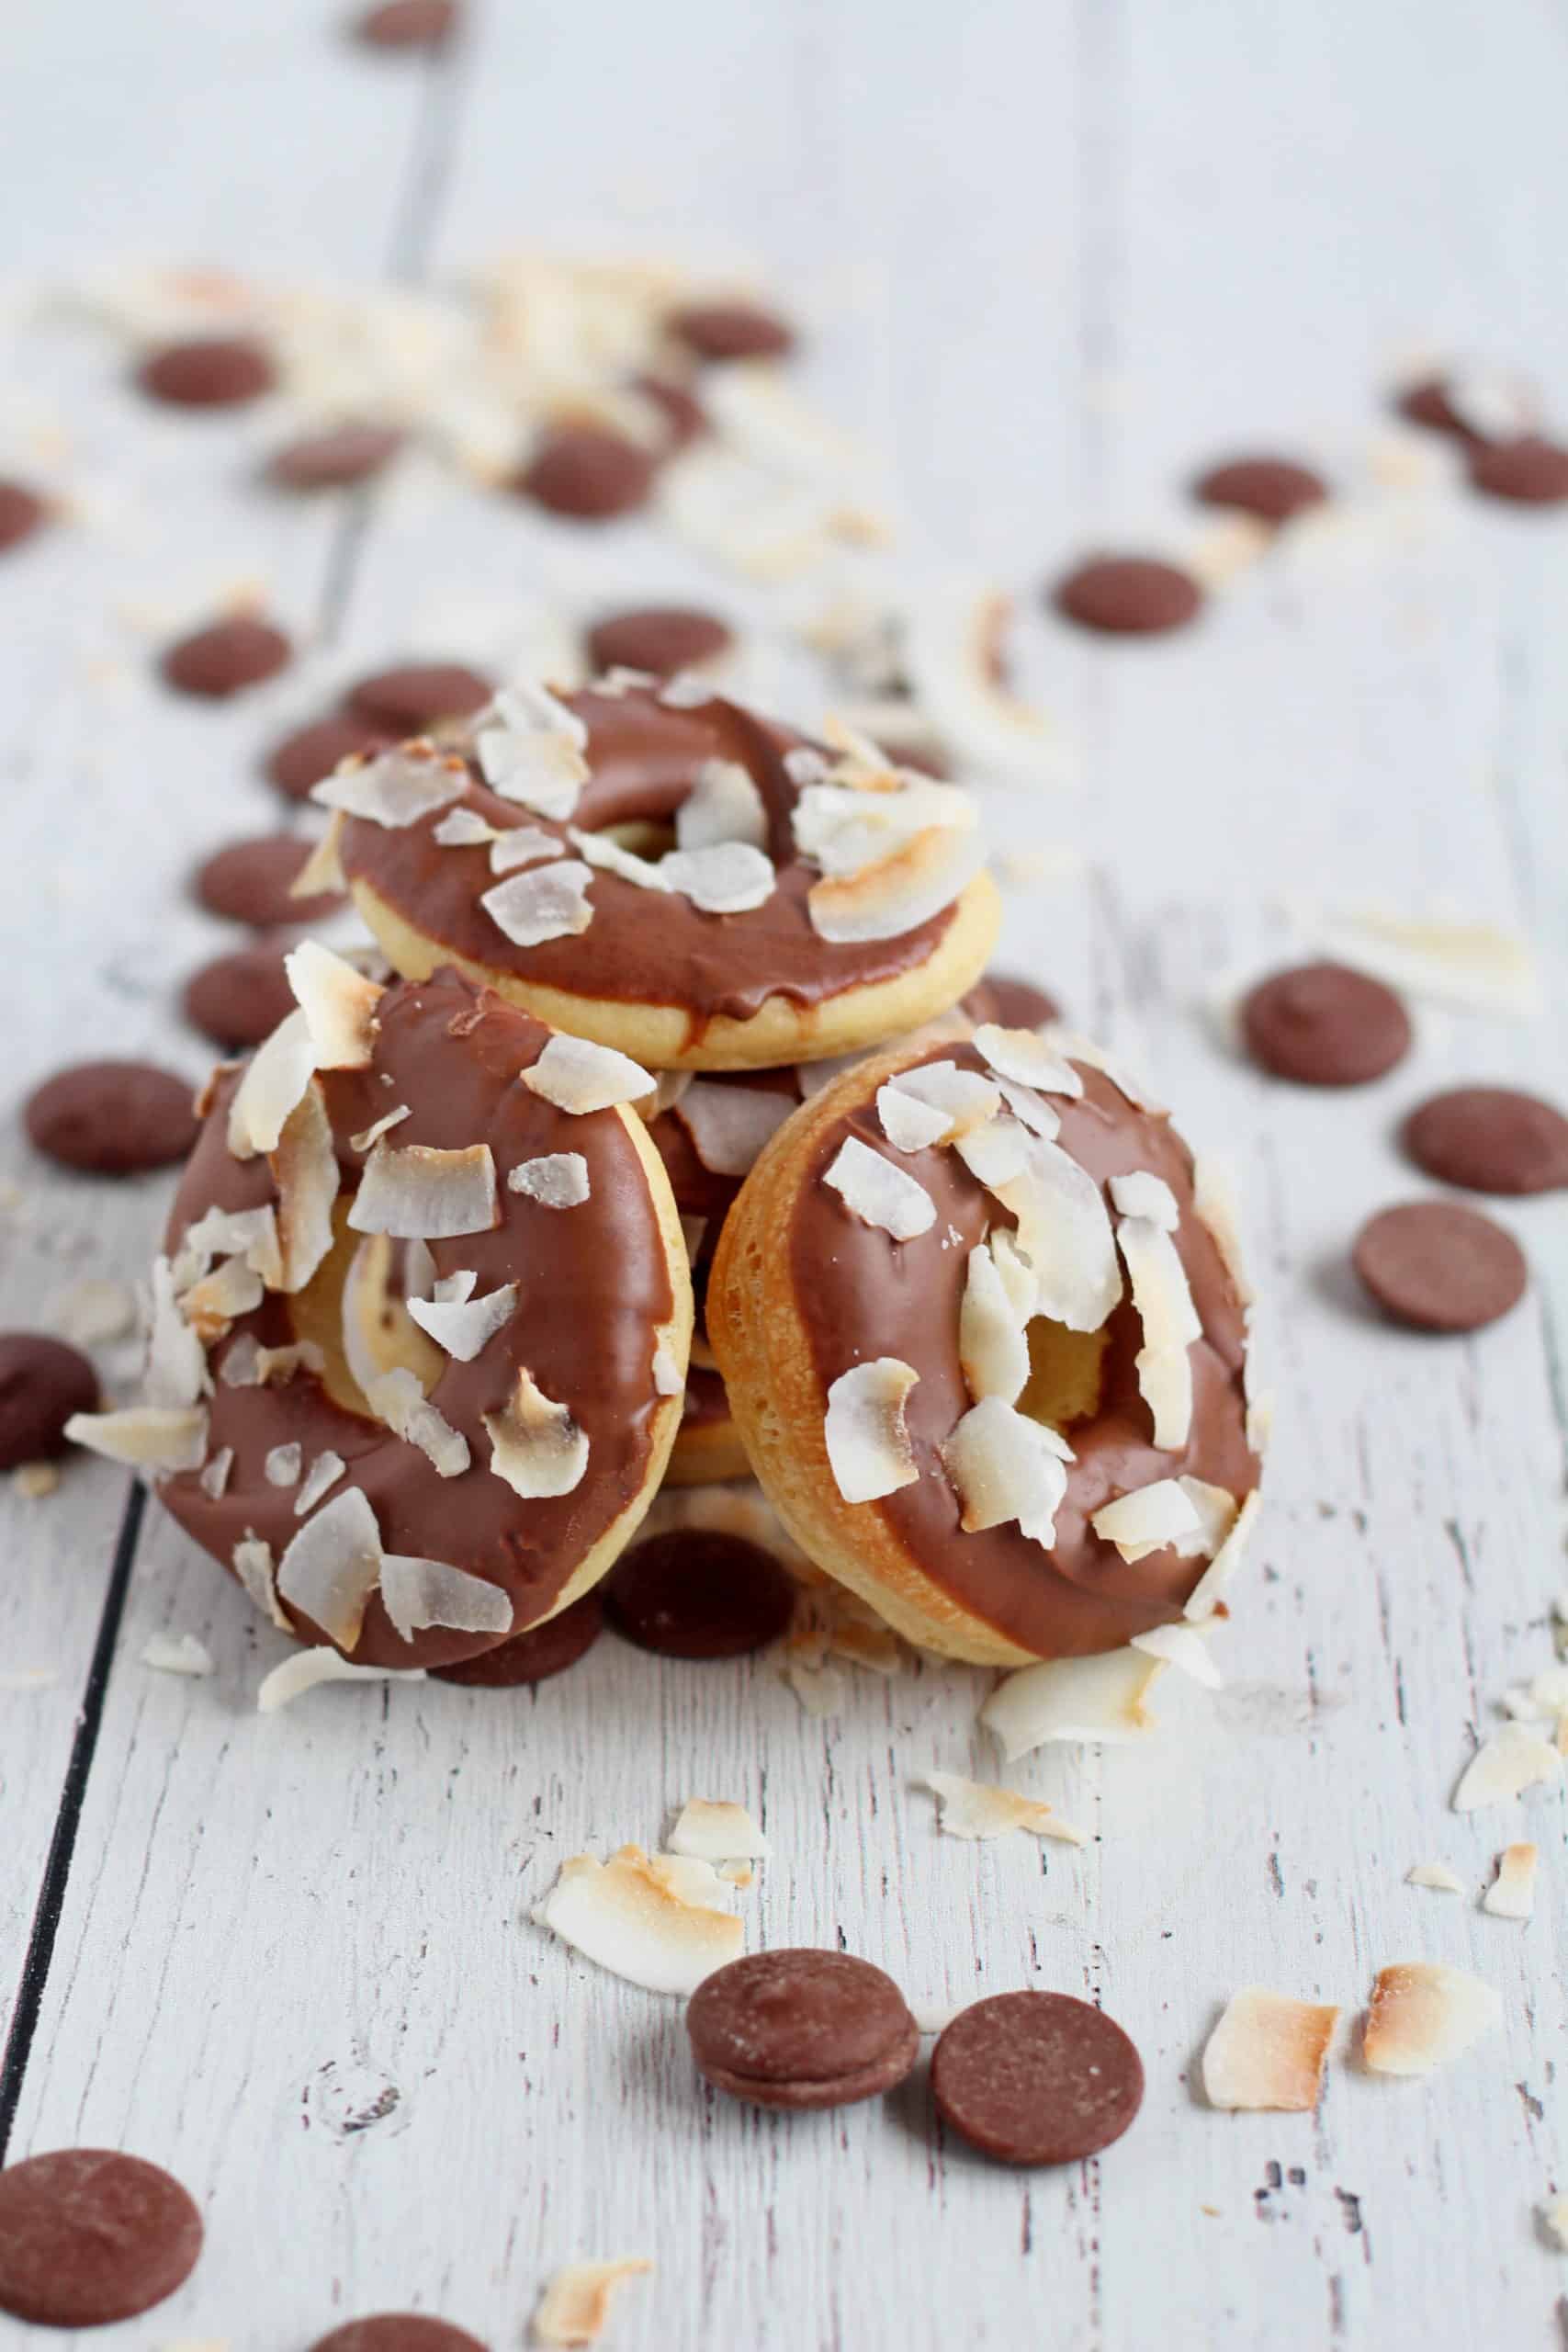 donuts baked in oven with chocolate glaze and toasted coconut flakes